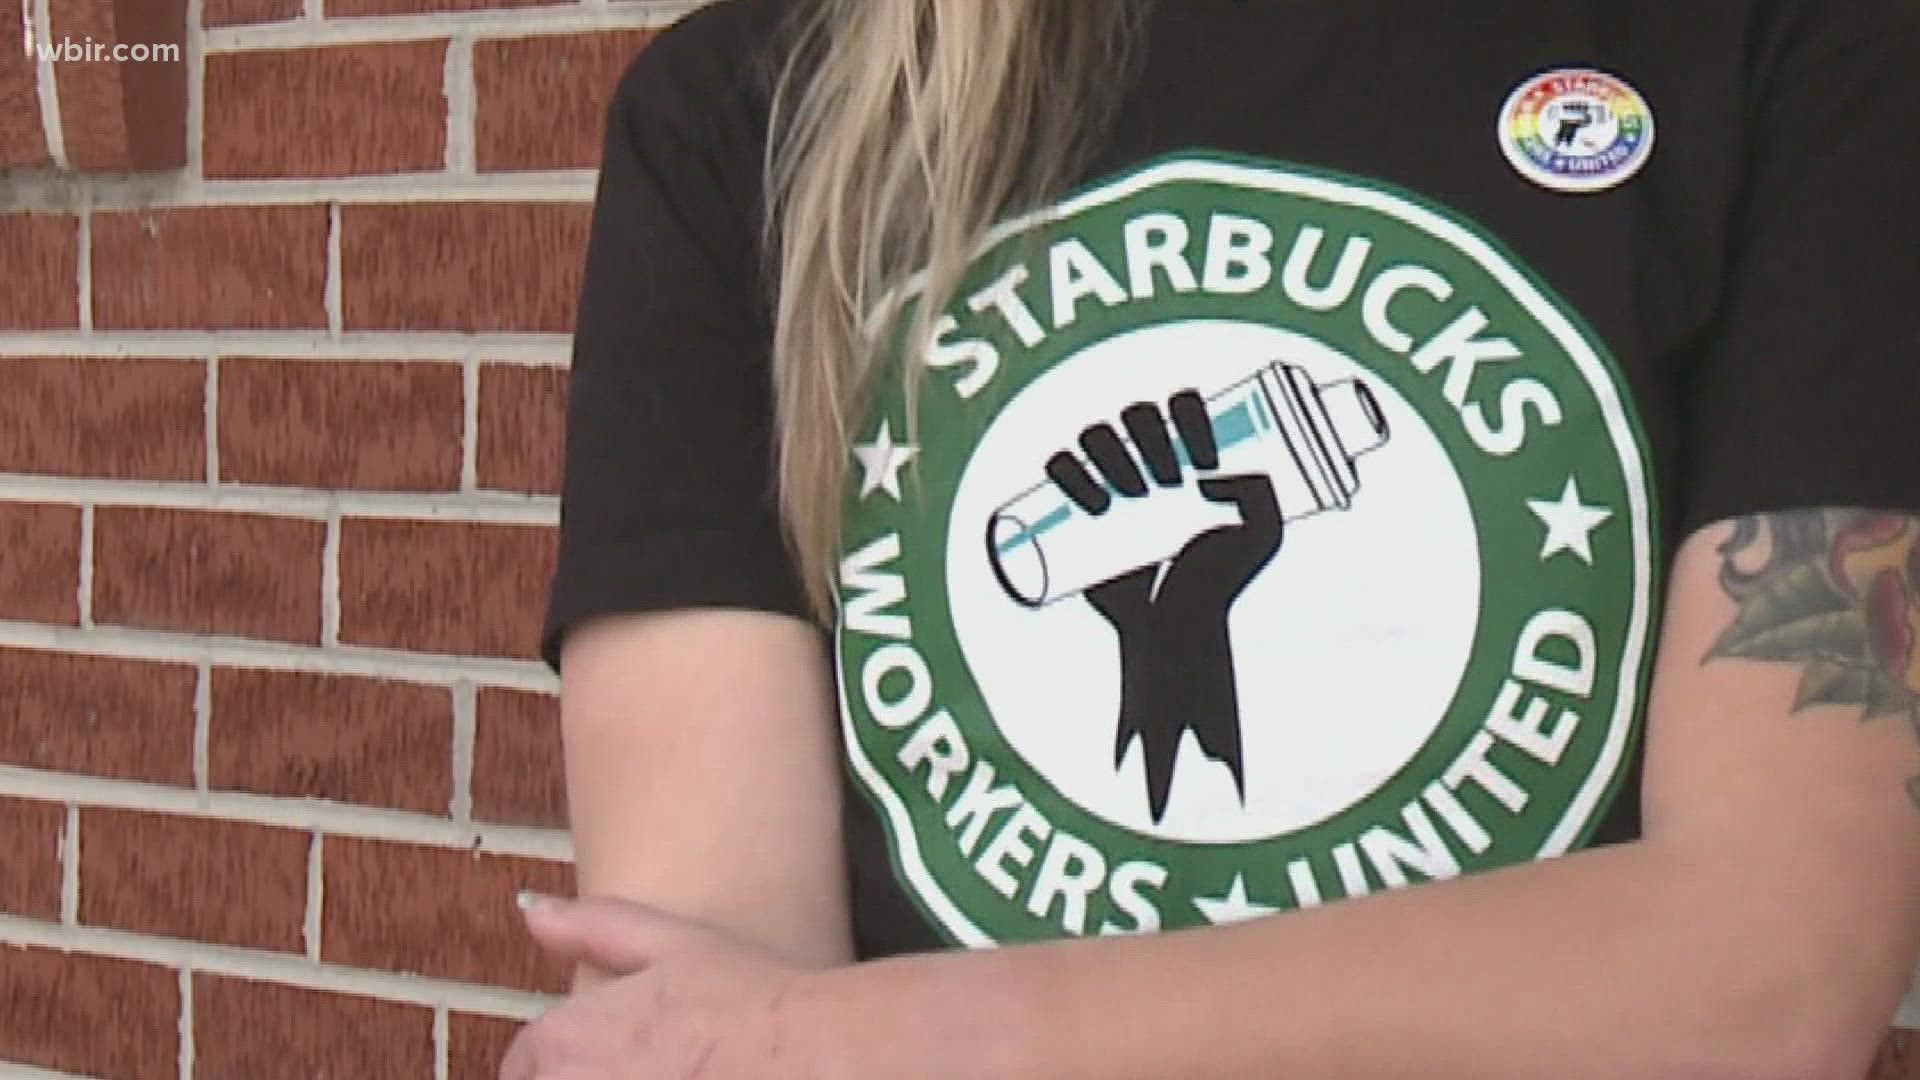 Employees voted 8-to-7 in favor of unionizing the Merchants Drive location, but Starbucks is contesting the outcome -- saying the deciding vote shouldn't count.